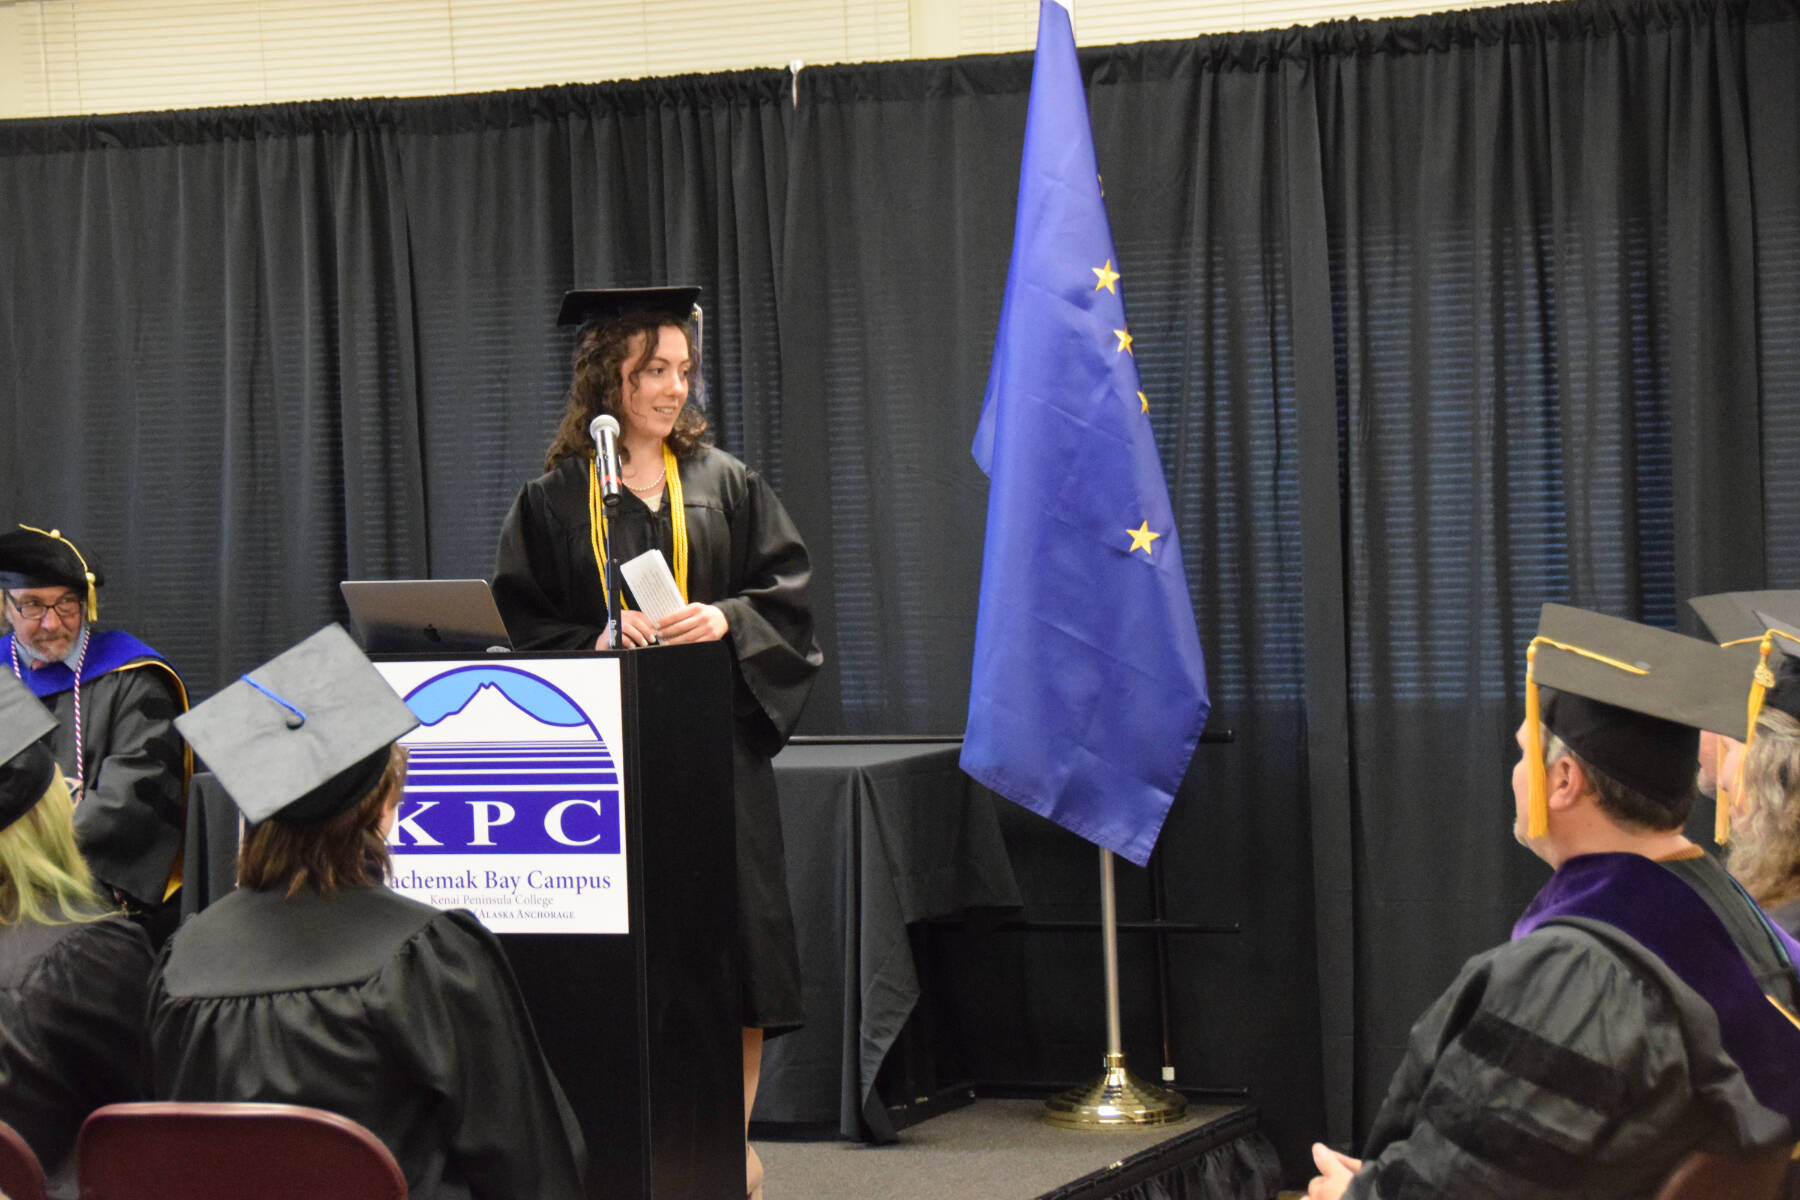 Valedictorian Elizabeth Rozeboom addresses Kachemak Bay Campus faculty and staff during her valedictorian speech during the 2023 KBC Commencement on Wednesday, May 10, 2023, in Homer, Alaska. (Photo by Delcenia Cosman/Homer News)